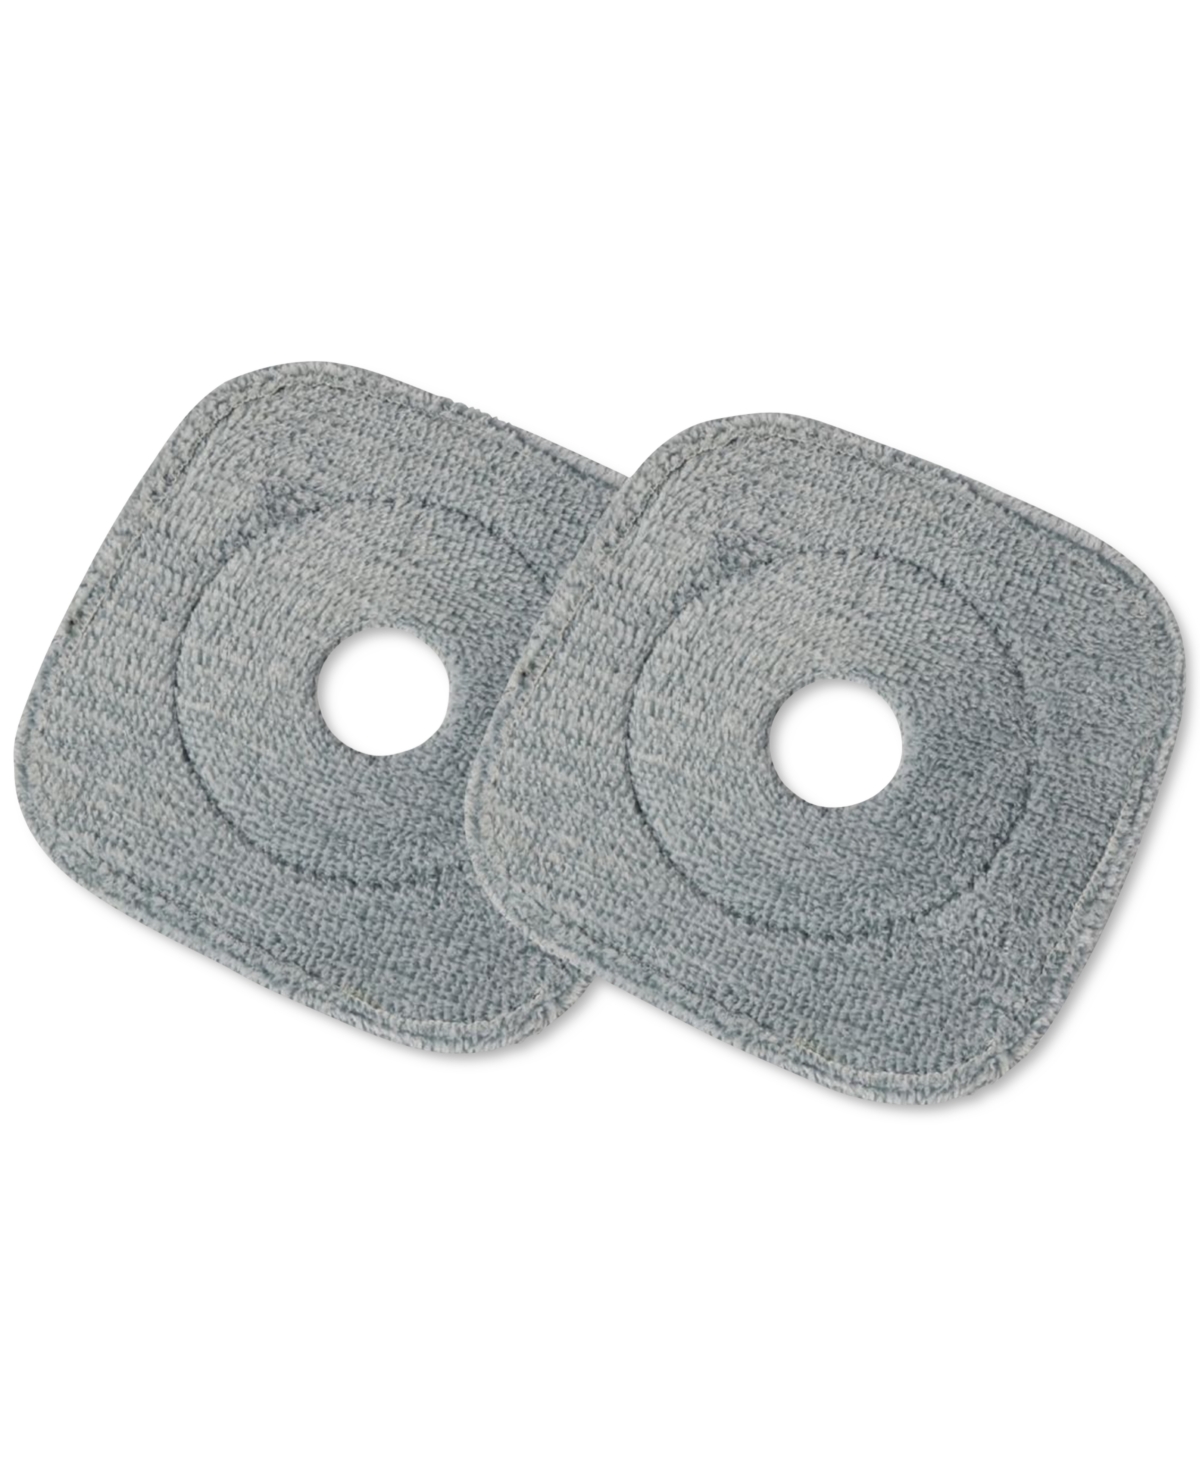 2-Pc. Mp-800 Mop Pad Replacements - Gray